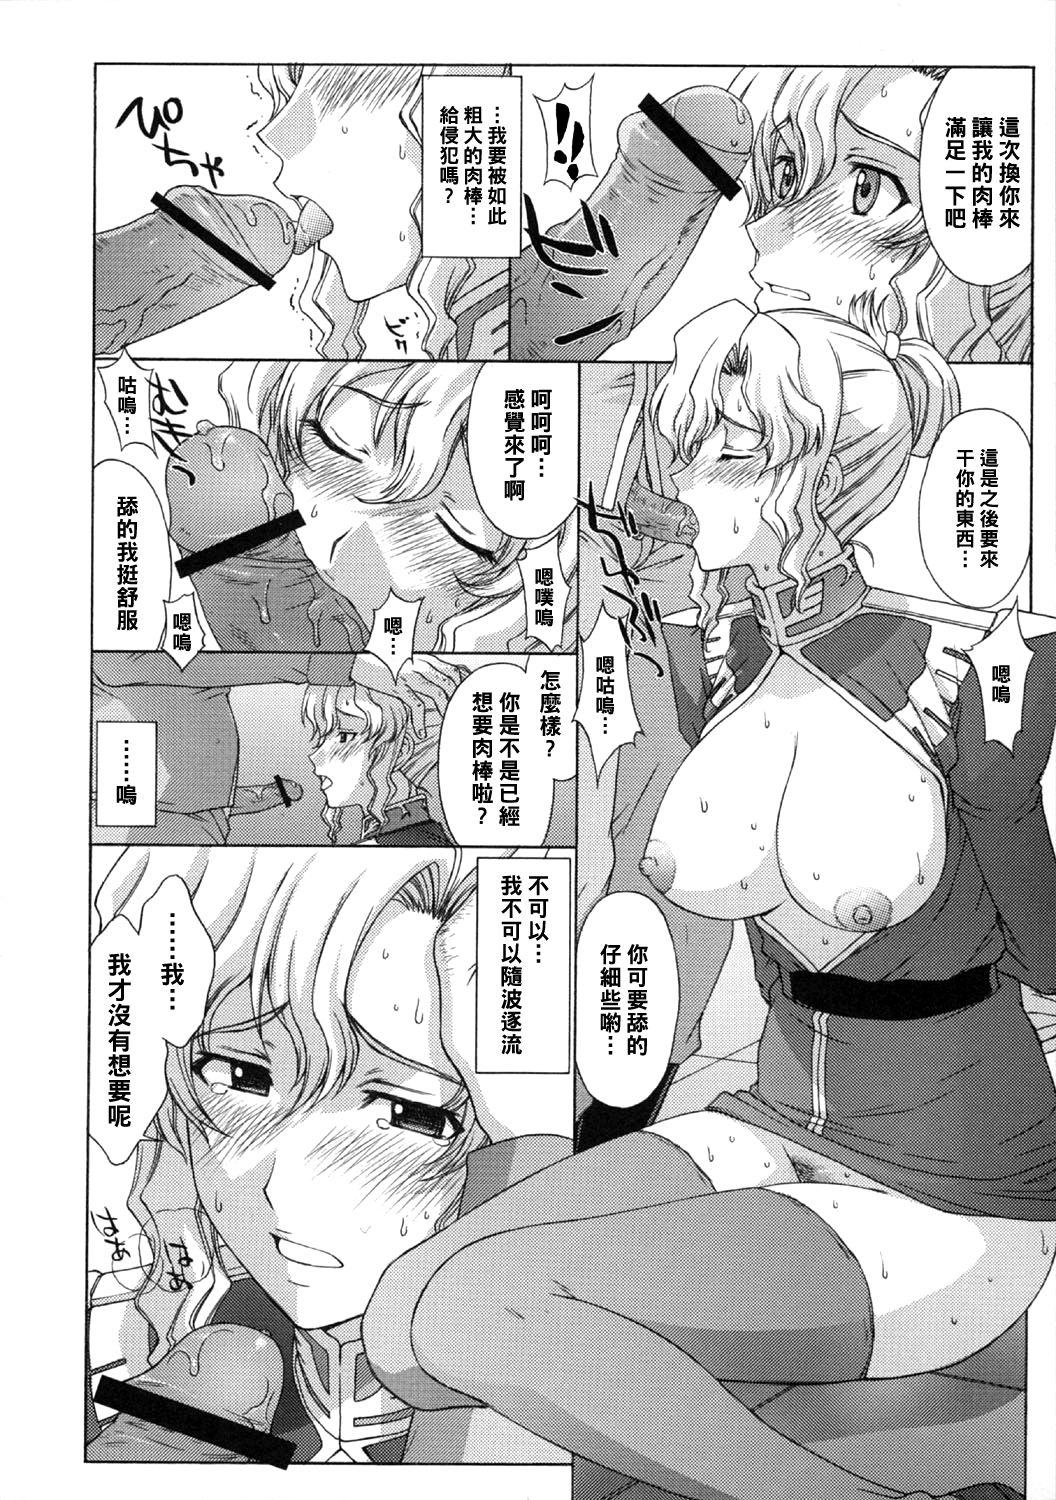 Delicia ZEON Lost War Chronicles Hishokan Hen - Mobile suit gundam lost war chronicles Bangbros - Page 5